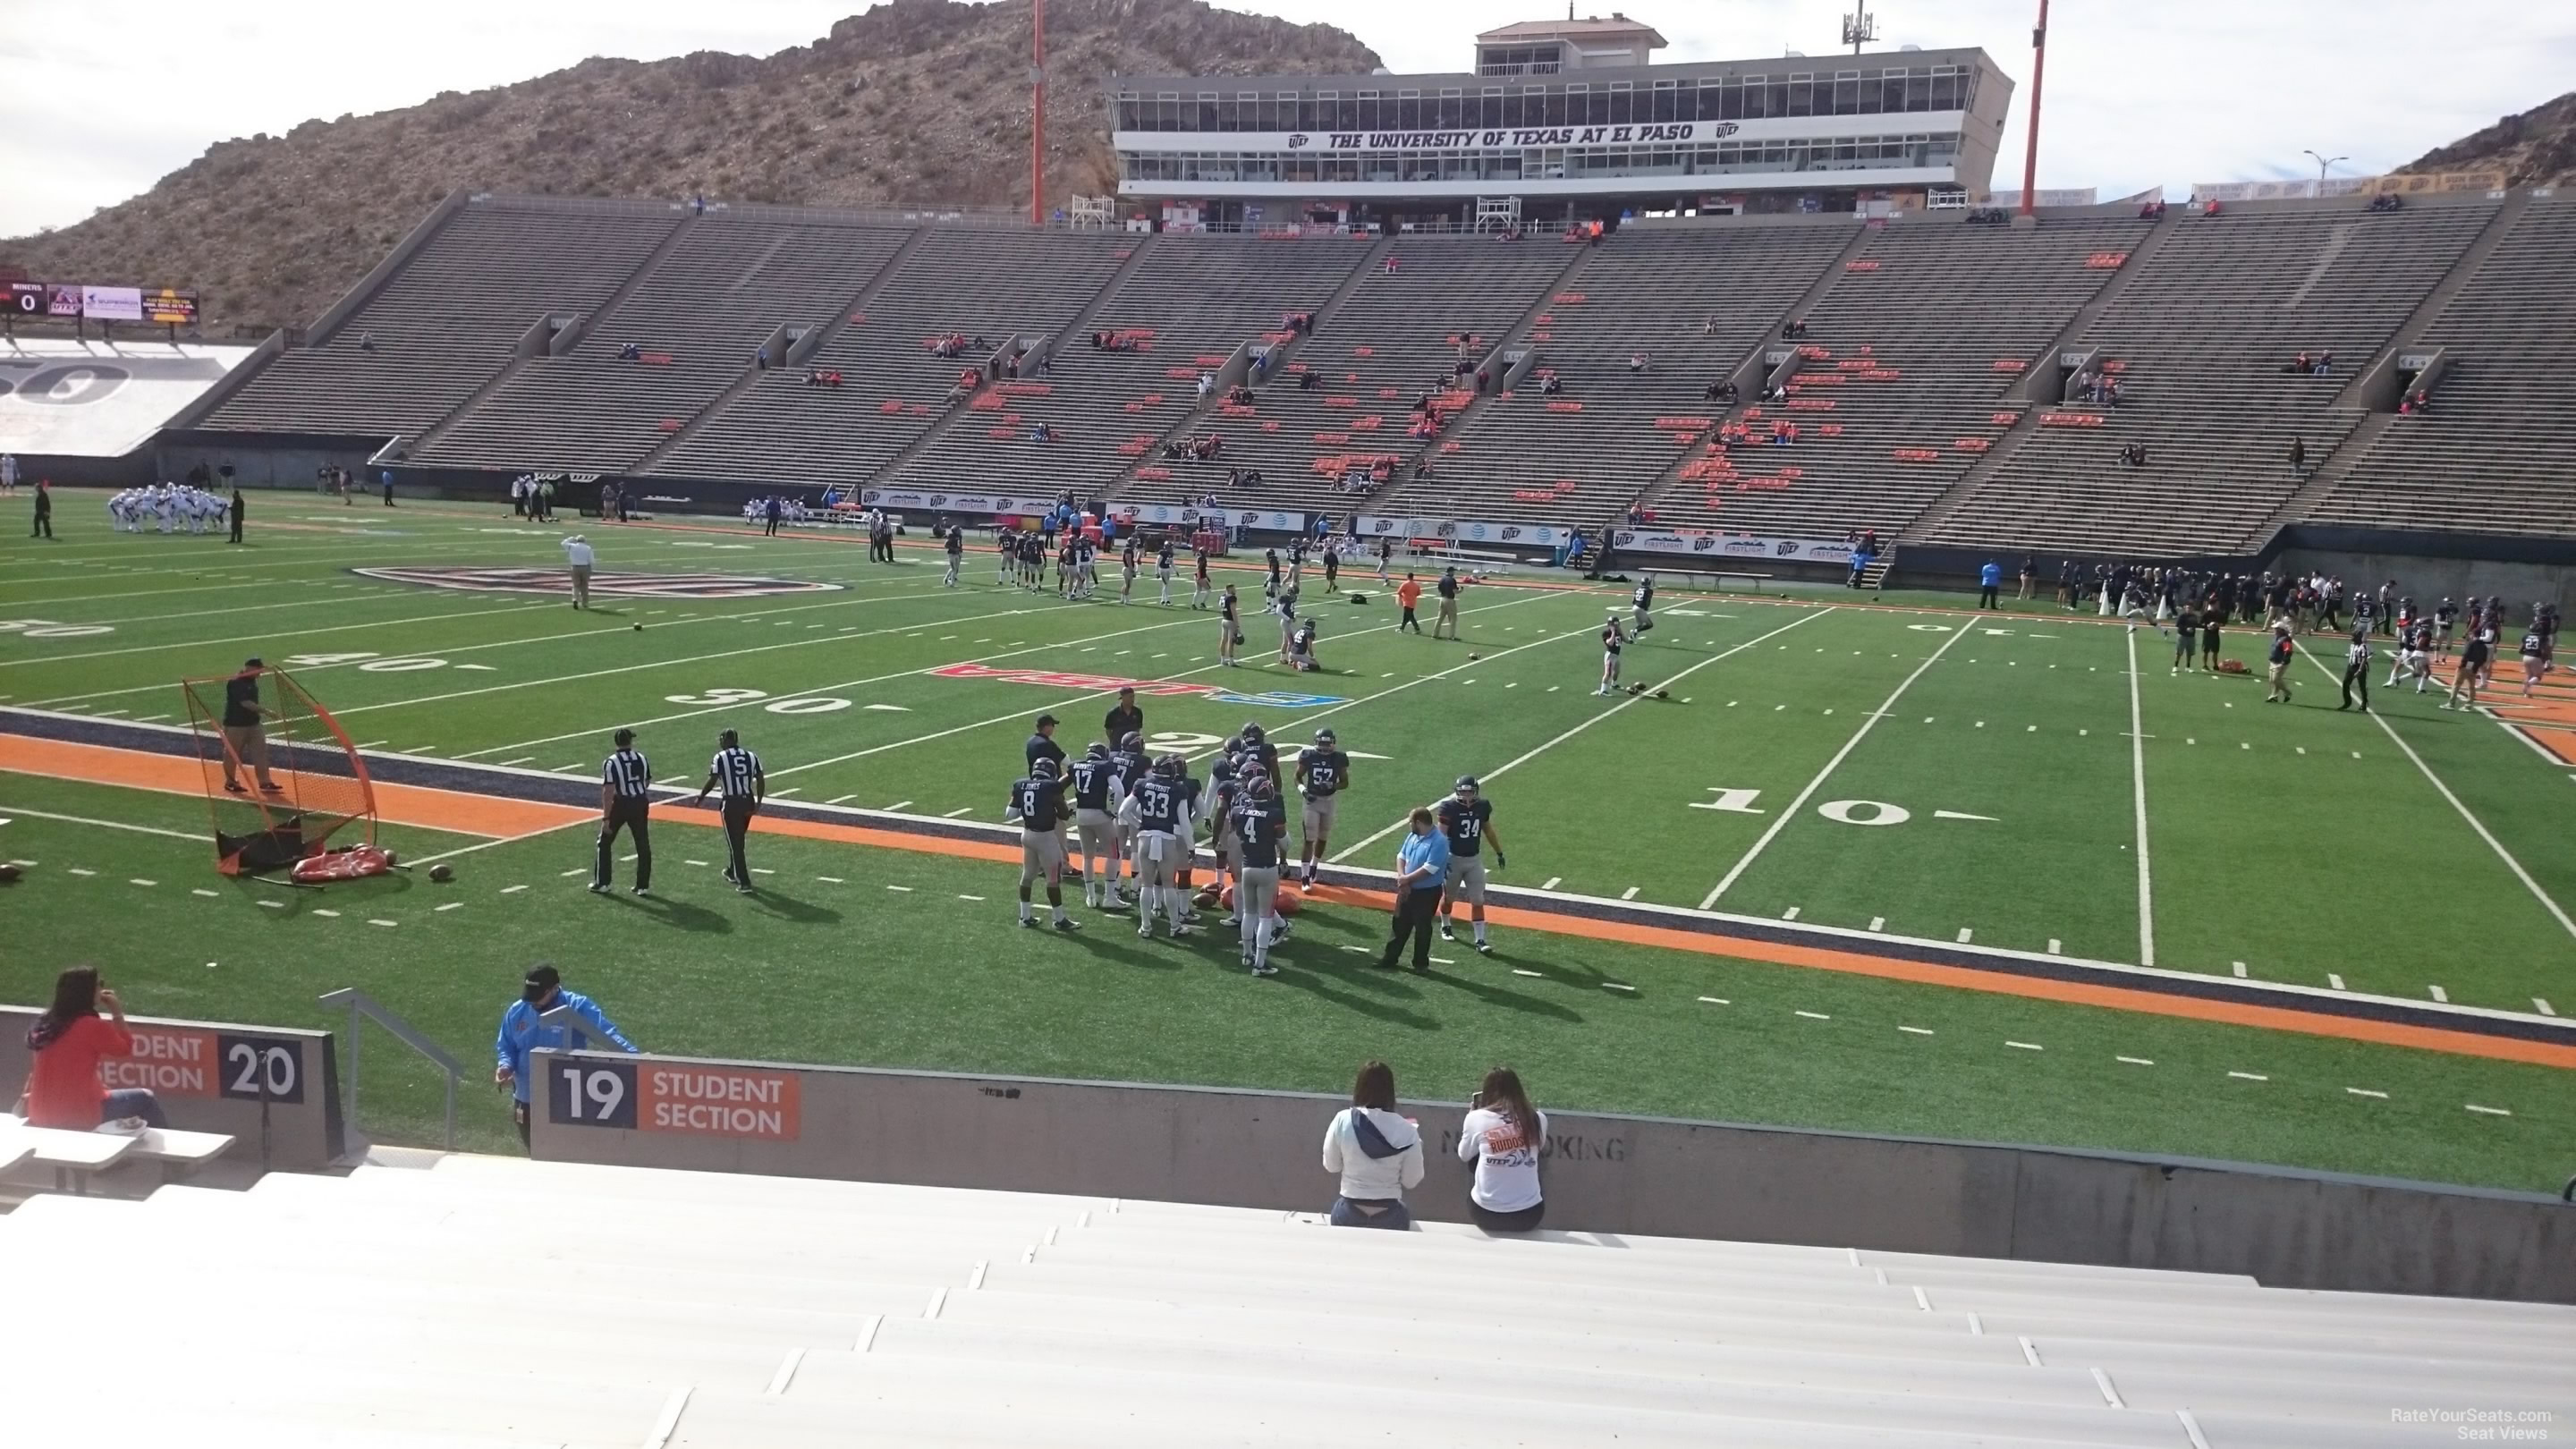 section 19, row 15 seat view  for football - sun bowl